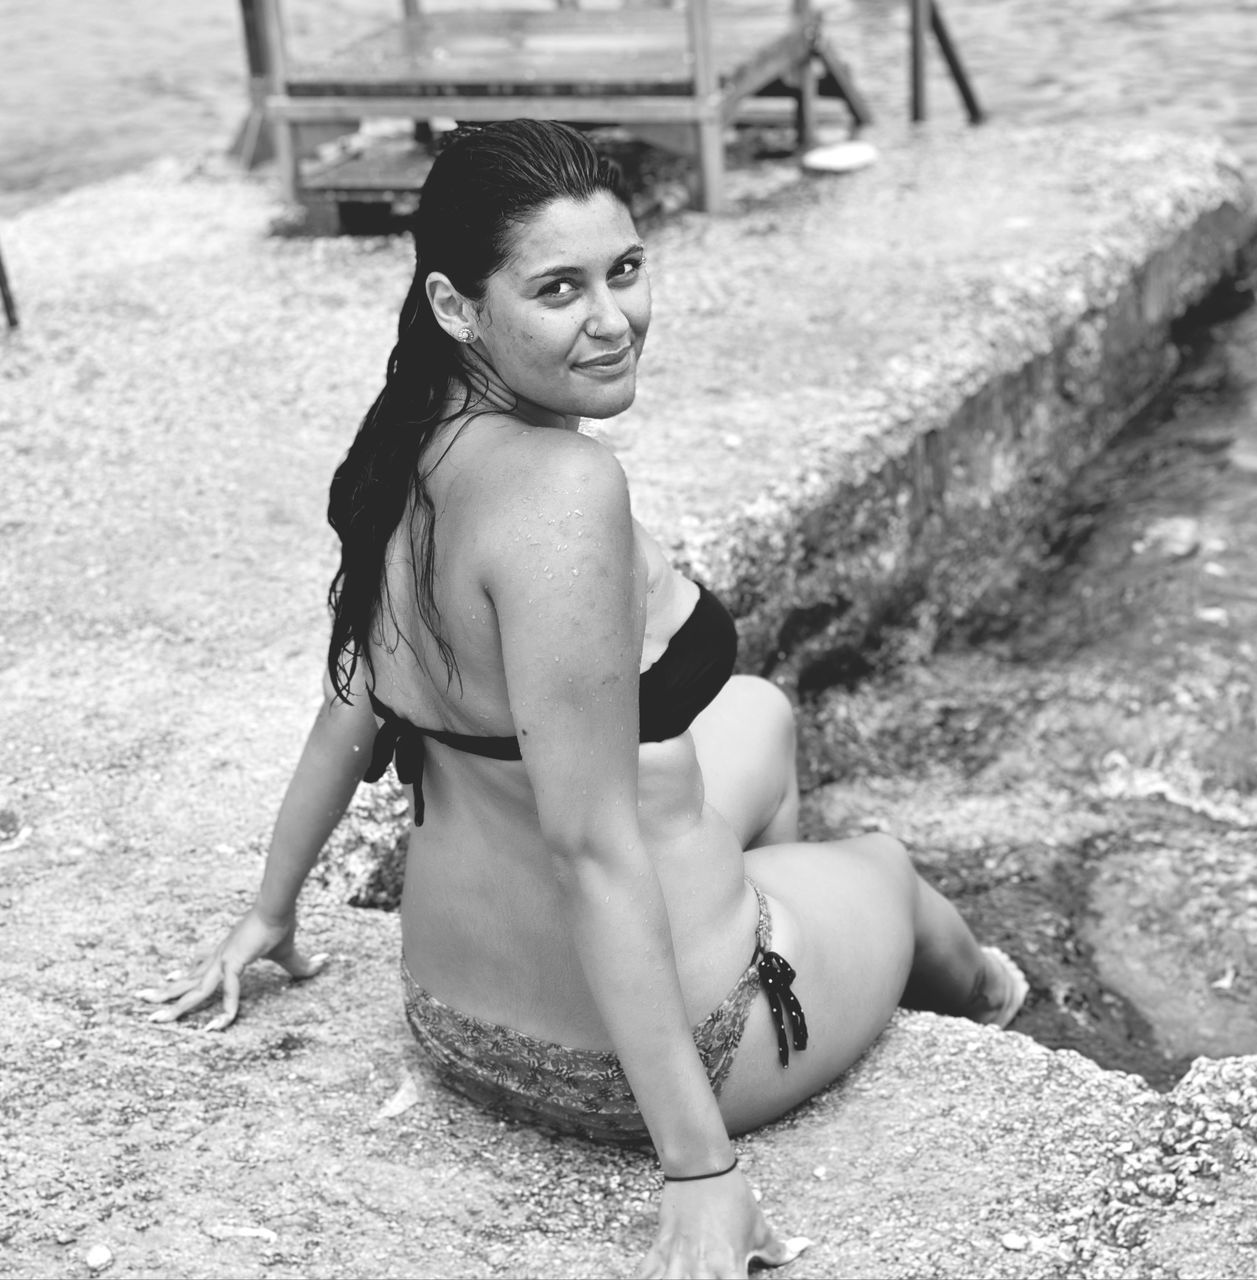 sitting, black and white, one person, women, female, photo shoot, full length, monochrome photography, adult, young adult, clothing, lifestyles, portrait, white, monochrome, person, human leg, leisure activity, looking at camera, nature, day, portrait photography, child, land, black, fashion, childhood, relaxation, hairstyle, human hair, swimwear, outdoors, human face, limb, summer, bikini, smiling